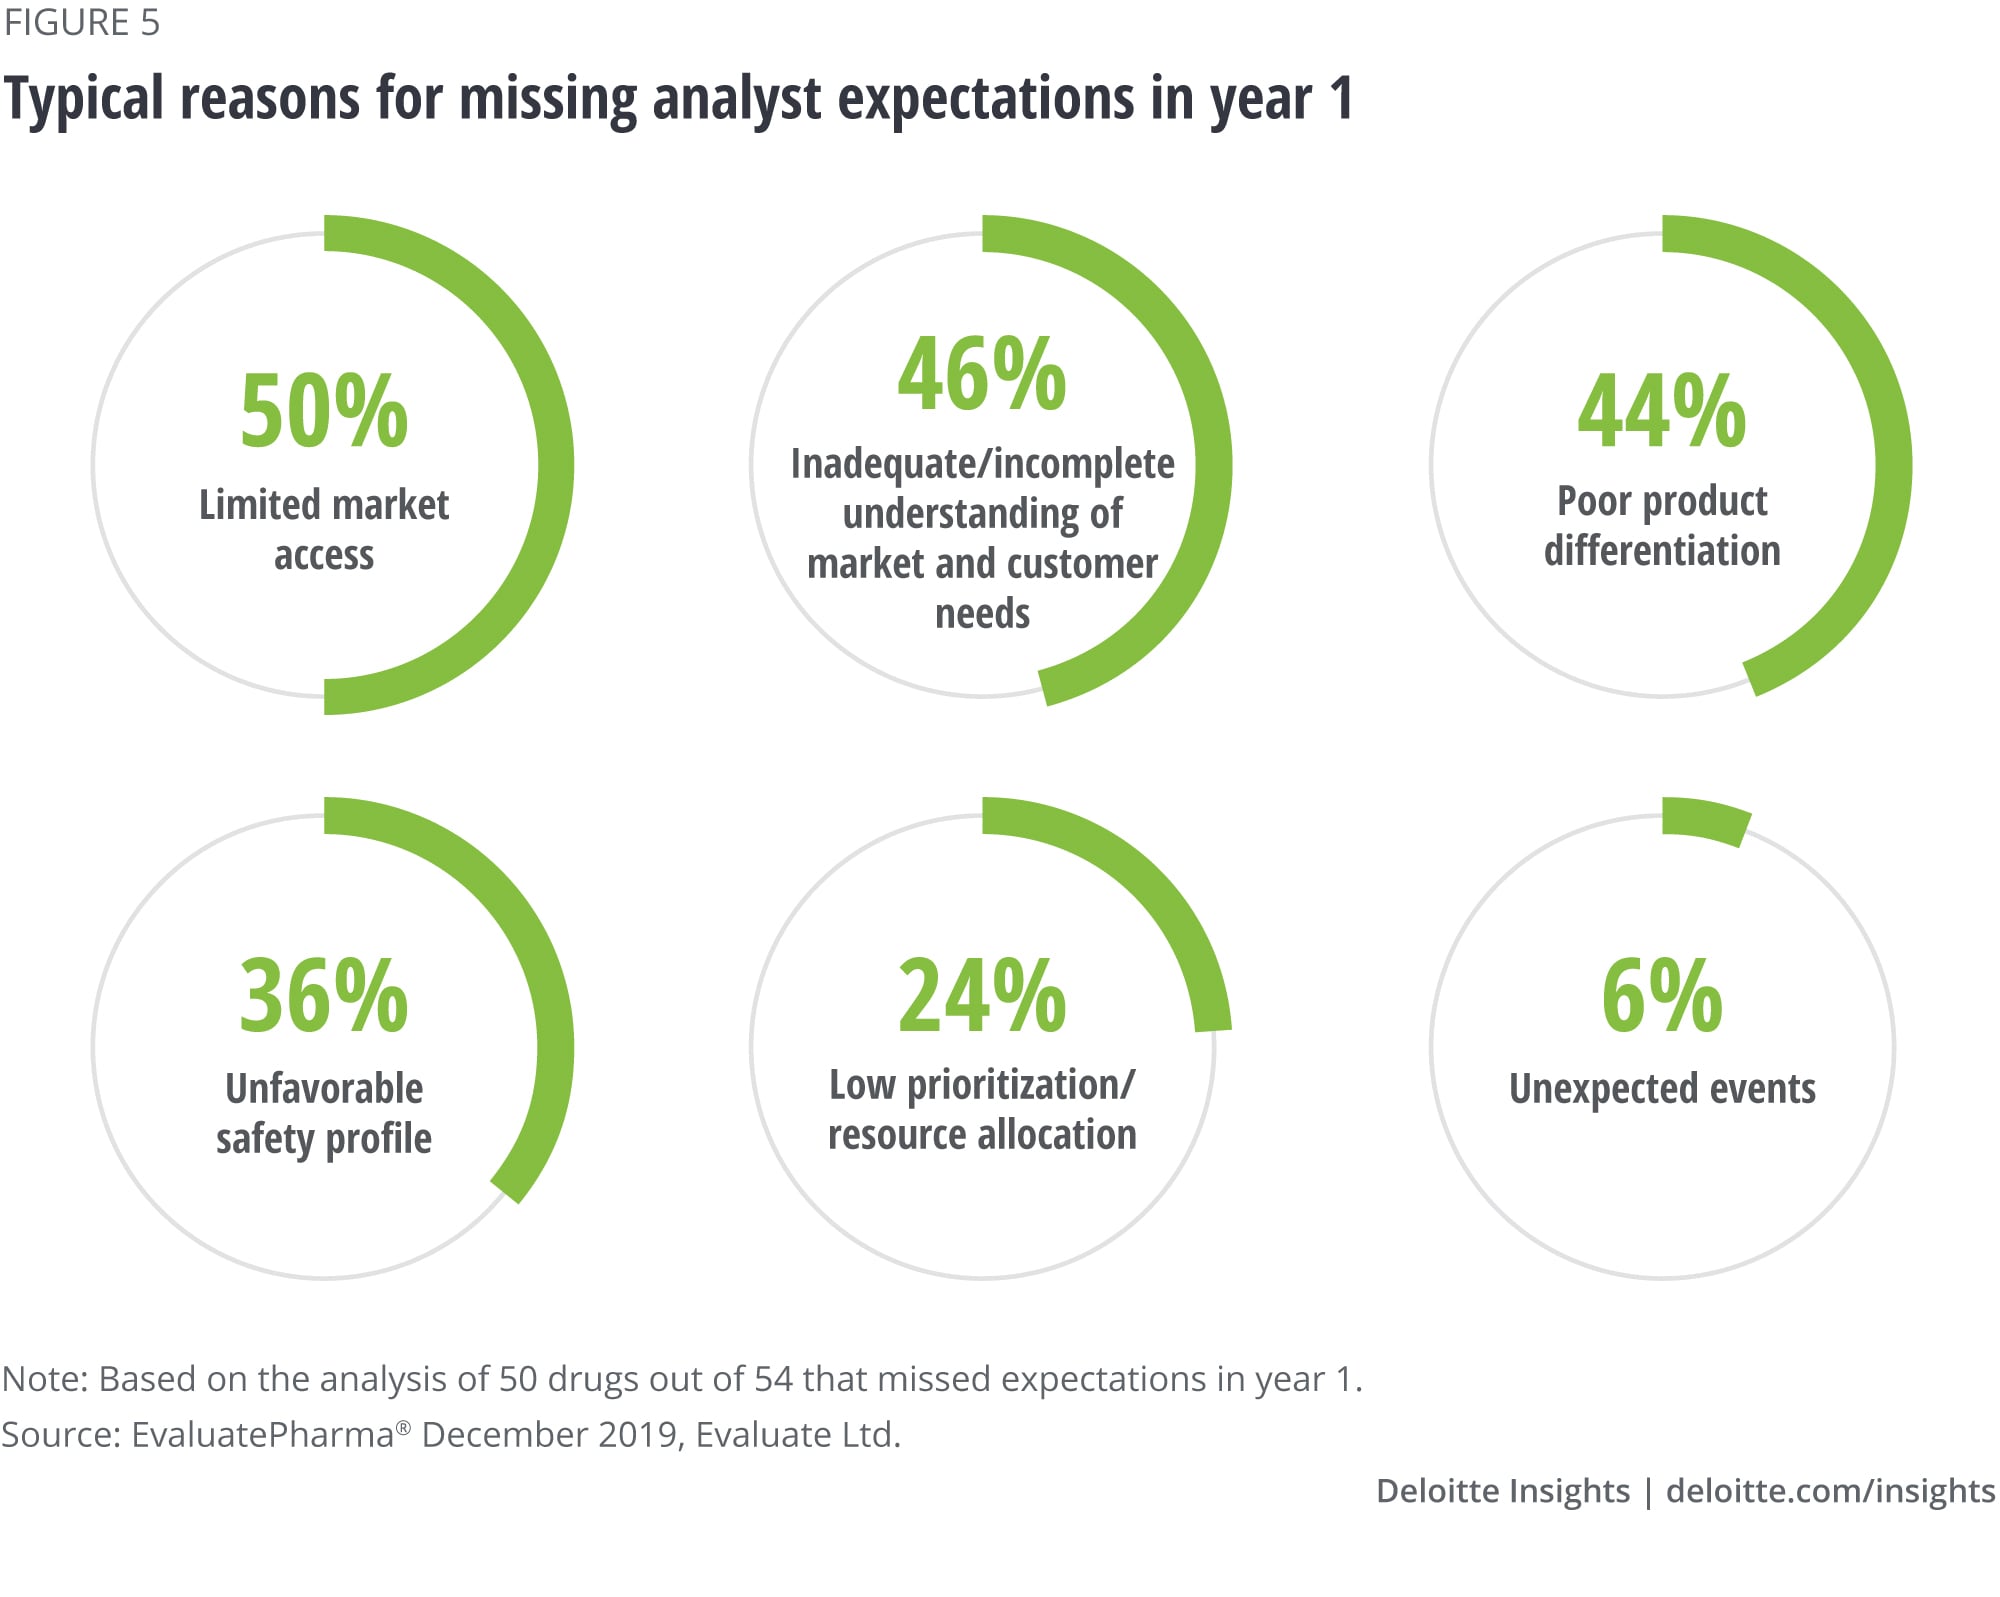 Limited market access topped the reasons for missing analyst expectations in year 1